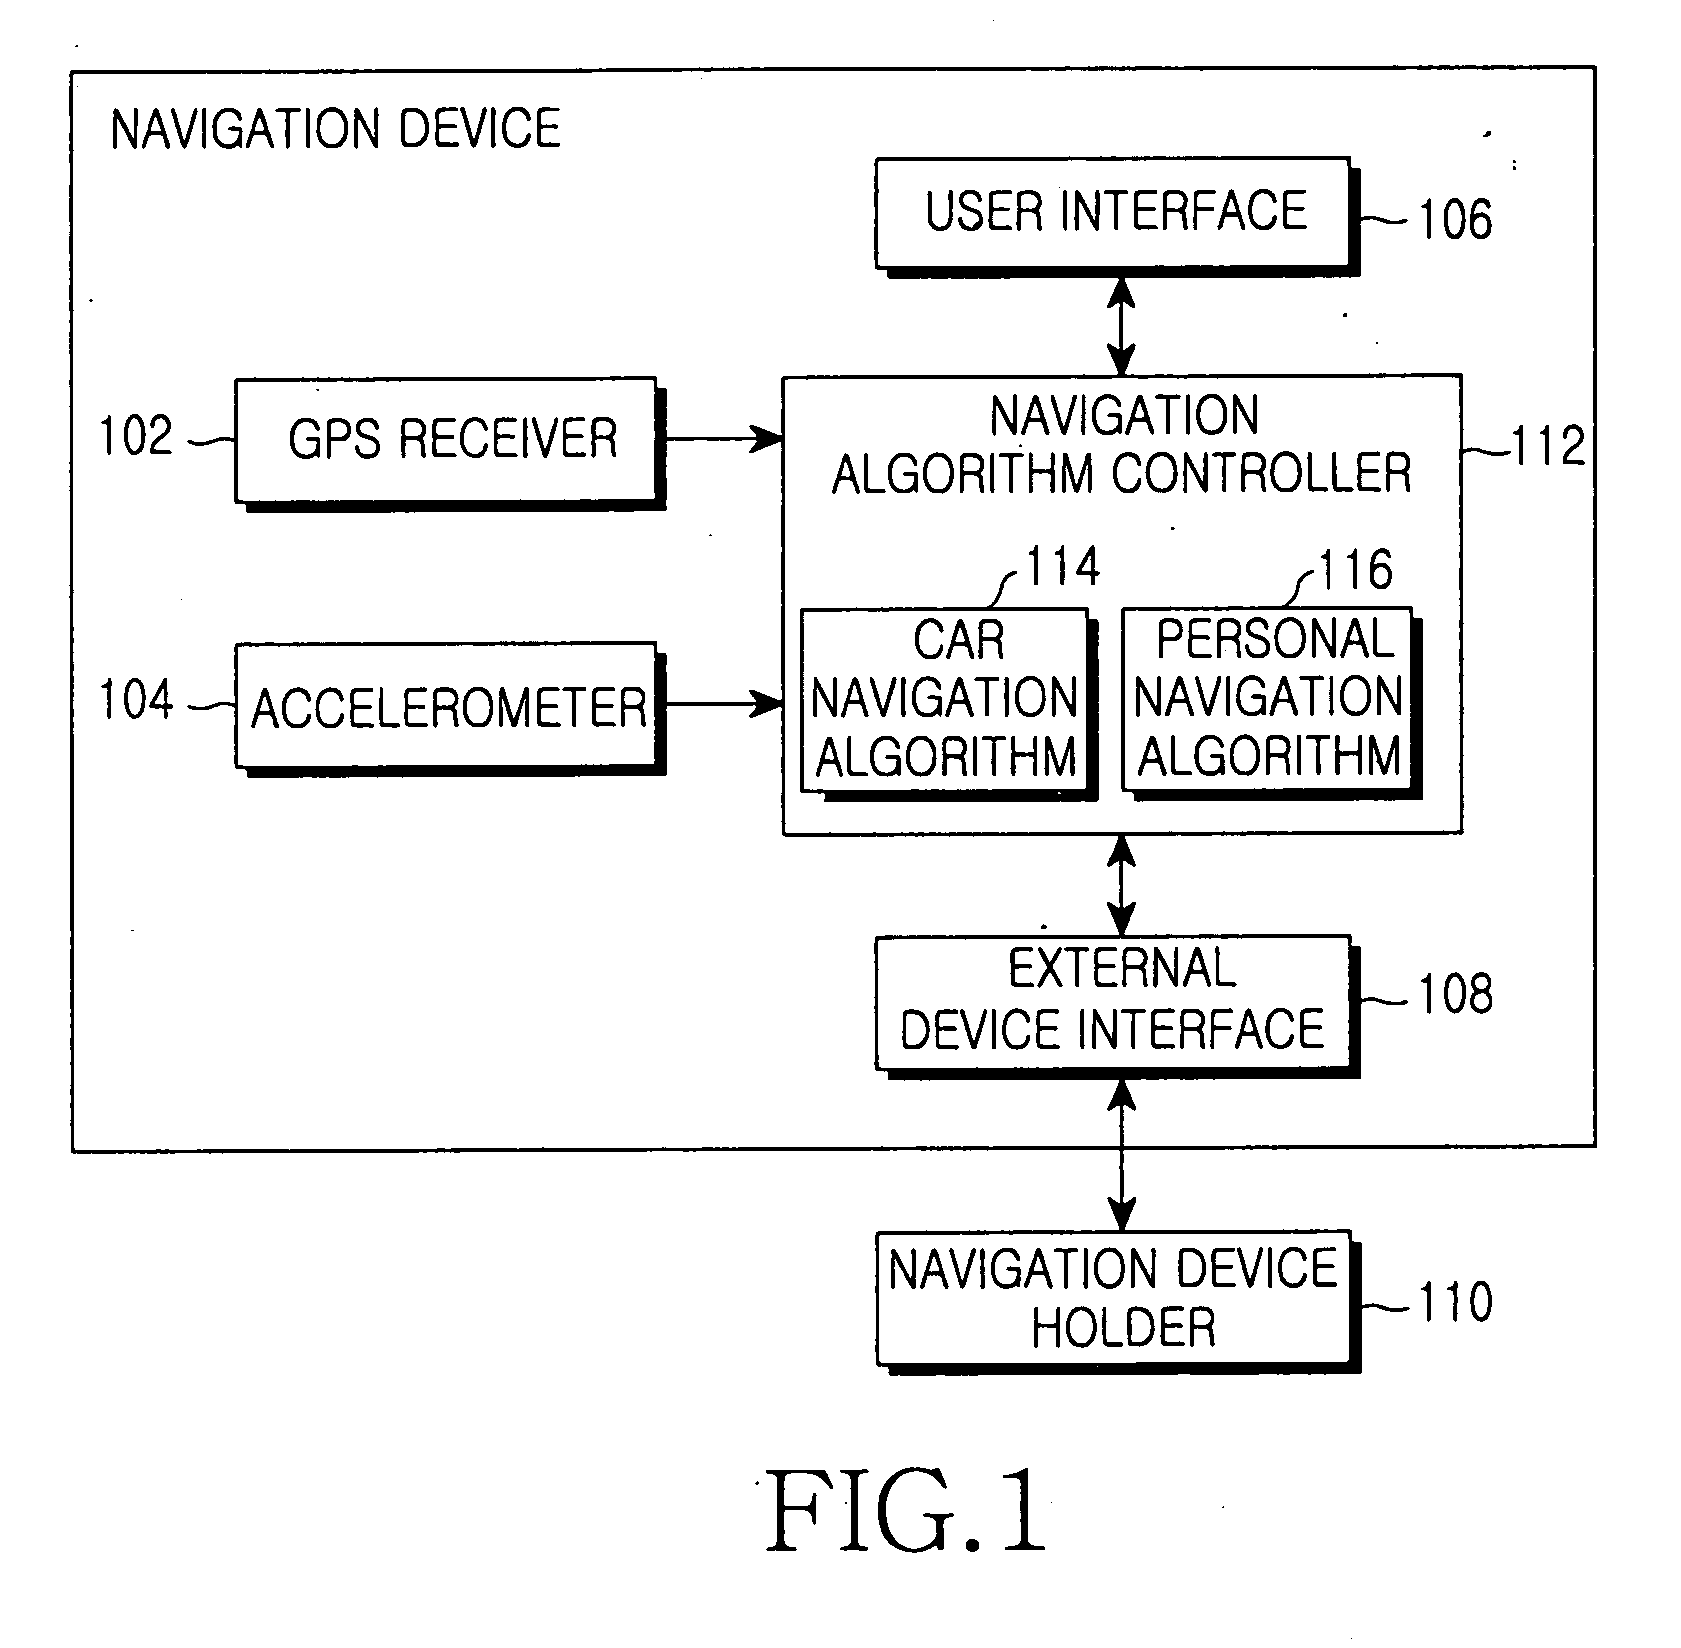 Apparatus and method for switching navigation mode between vehicle navigation mode and personal navigation mode in navigation device